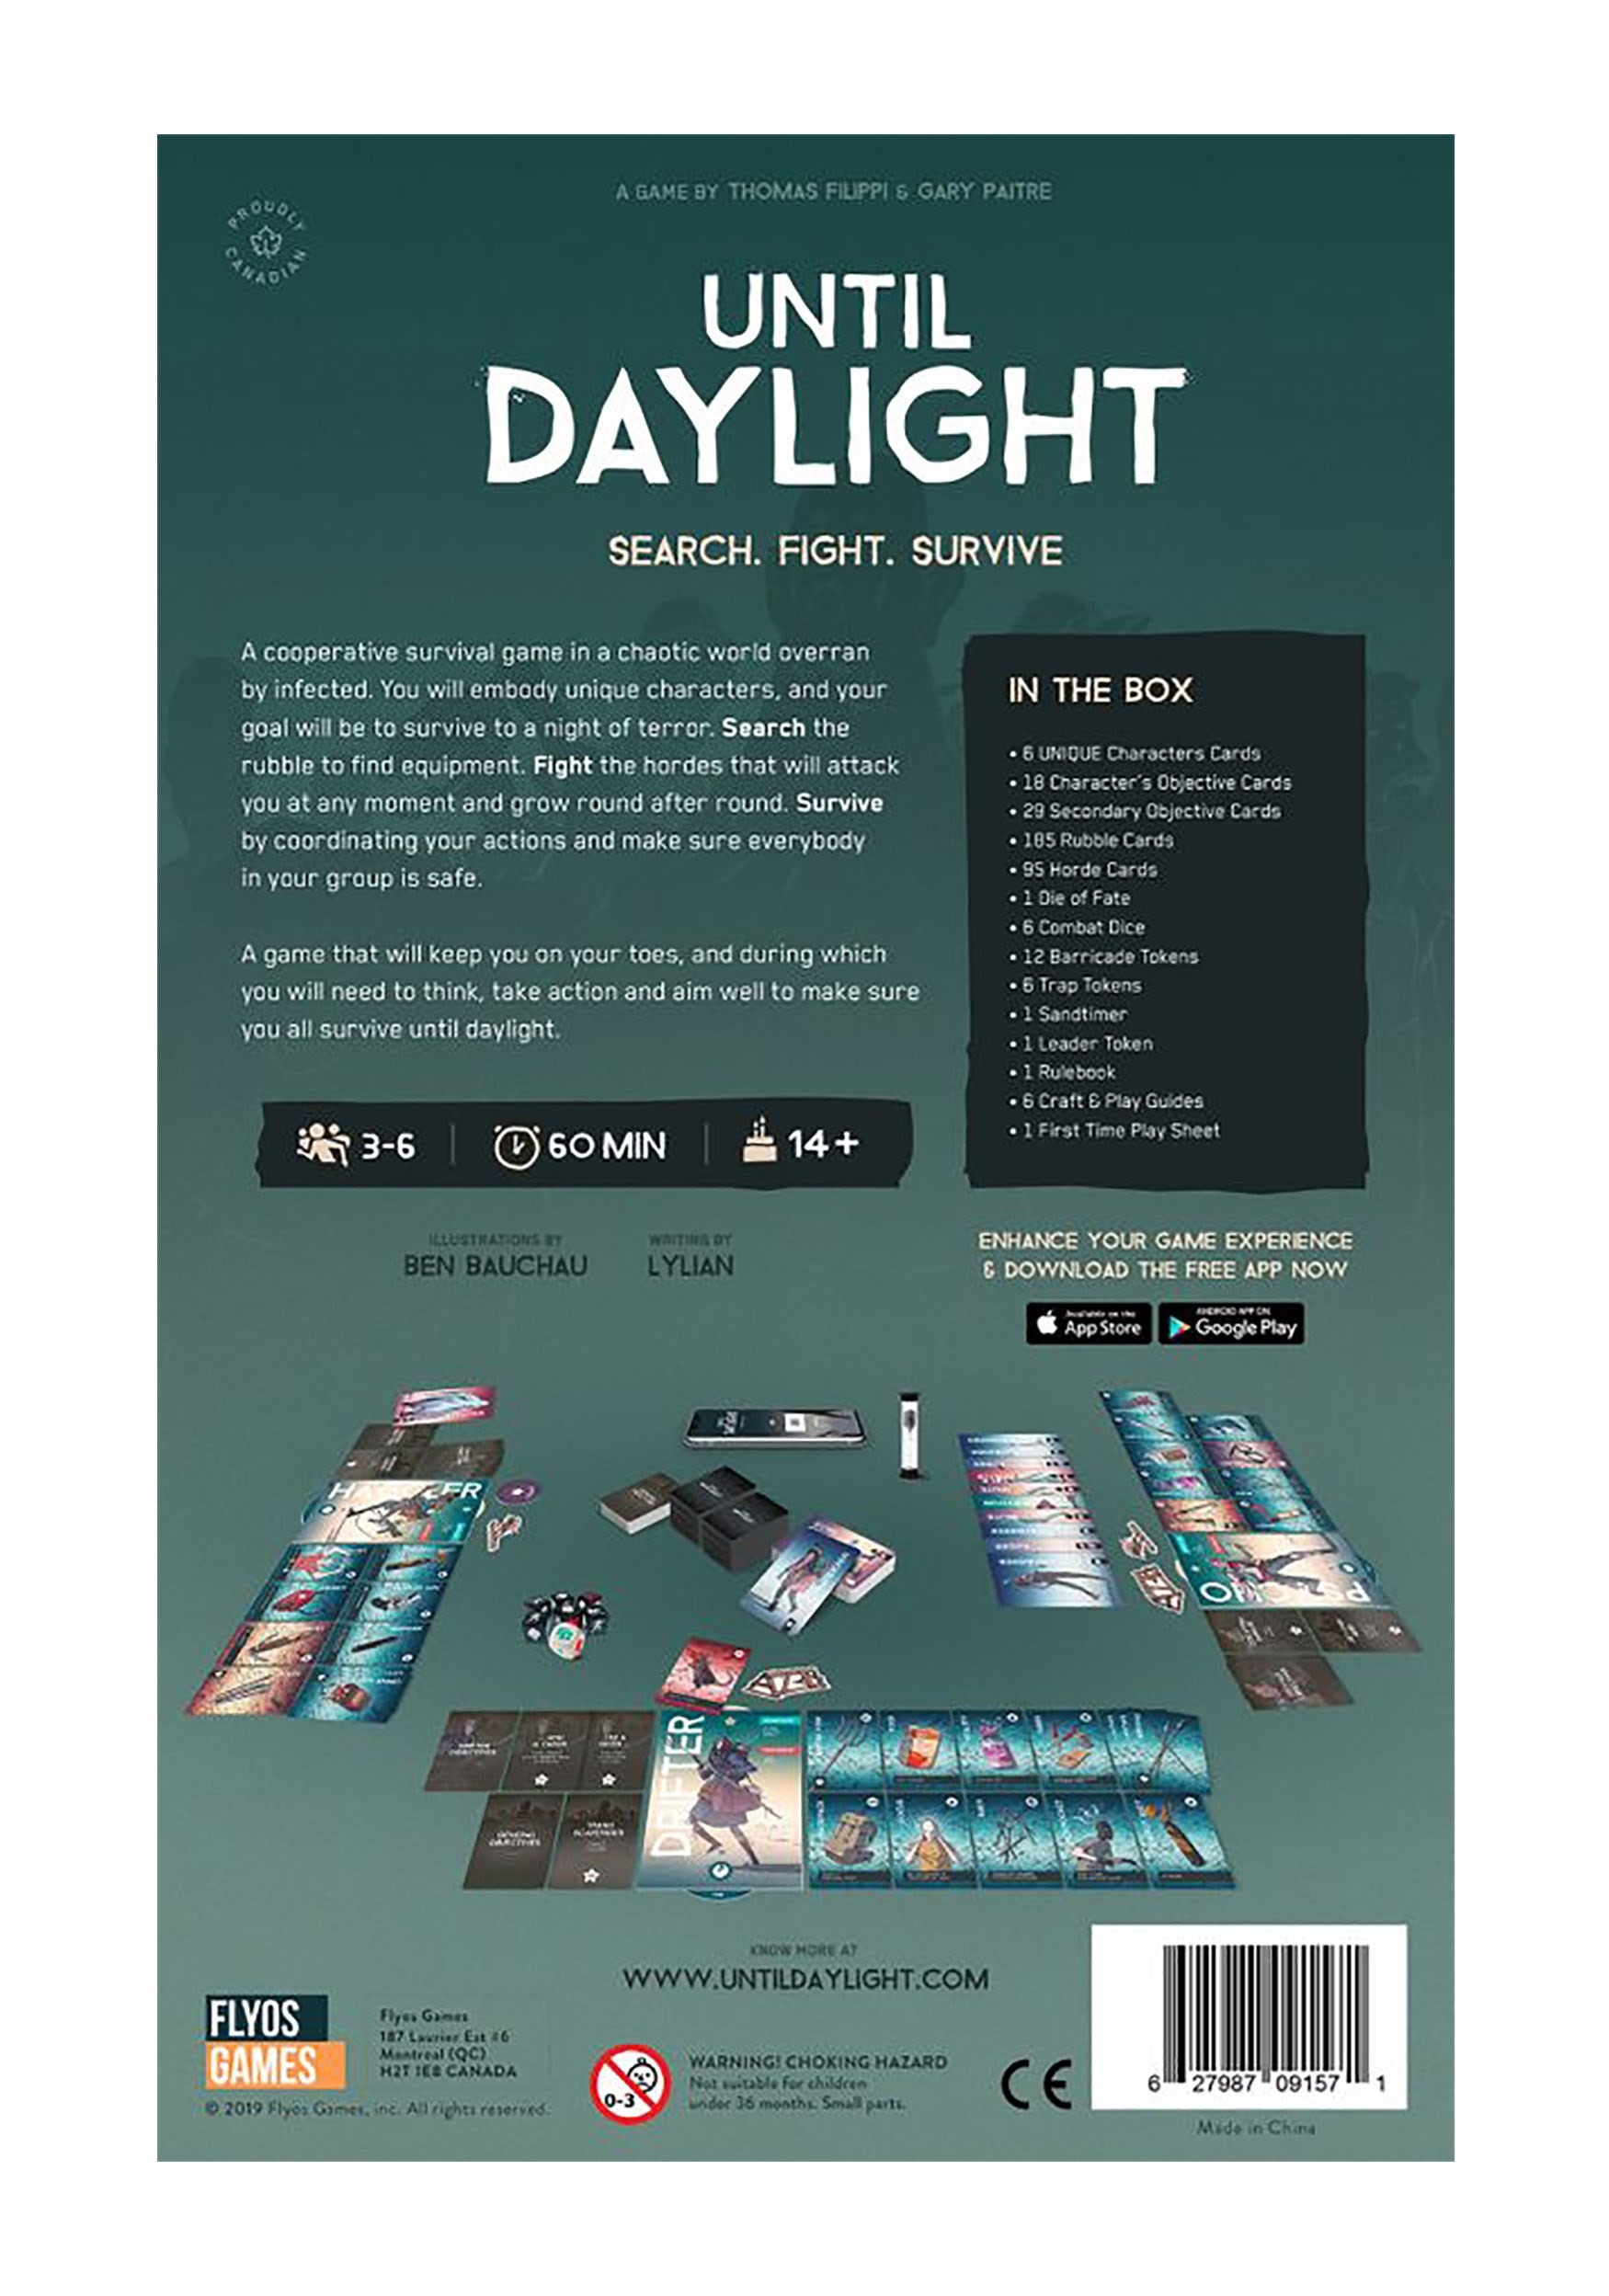 The Until Daylight Survival Card Game